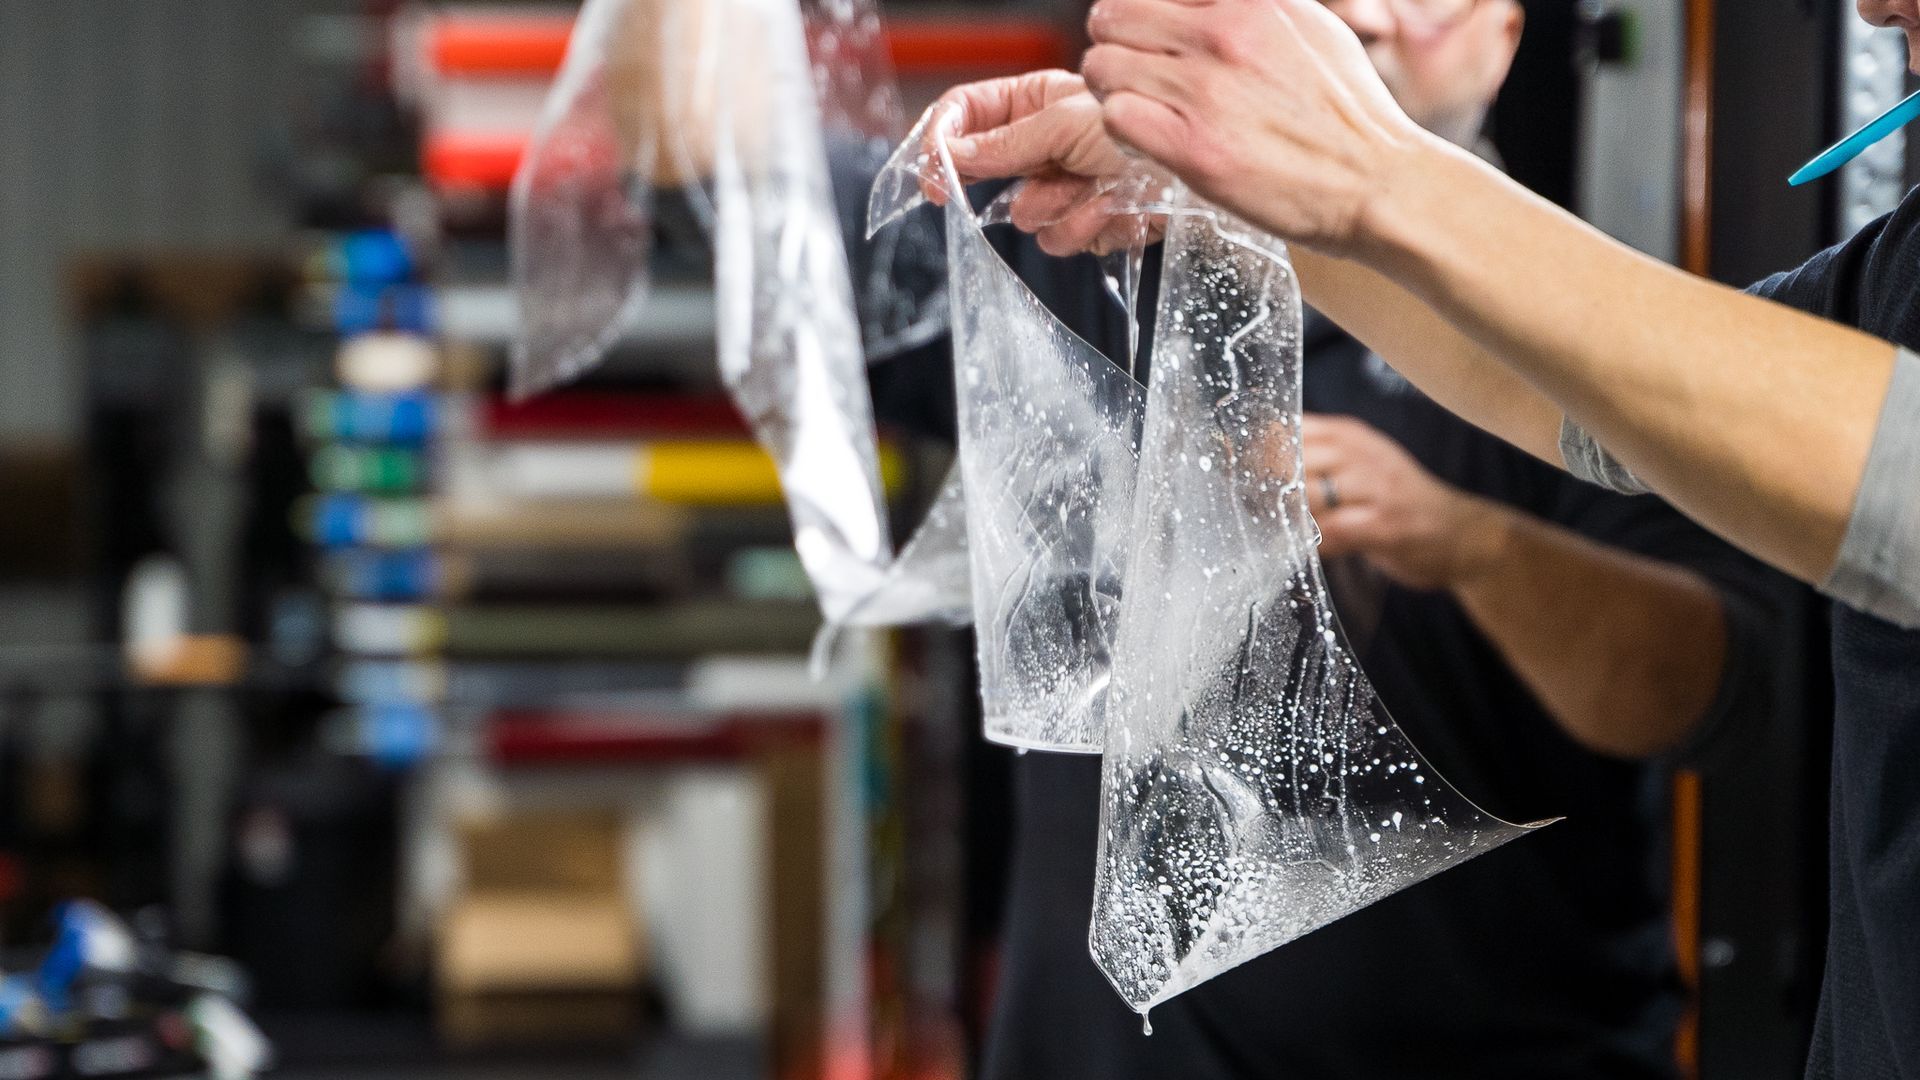 a person is holding a clear plastic wrap in their hands